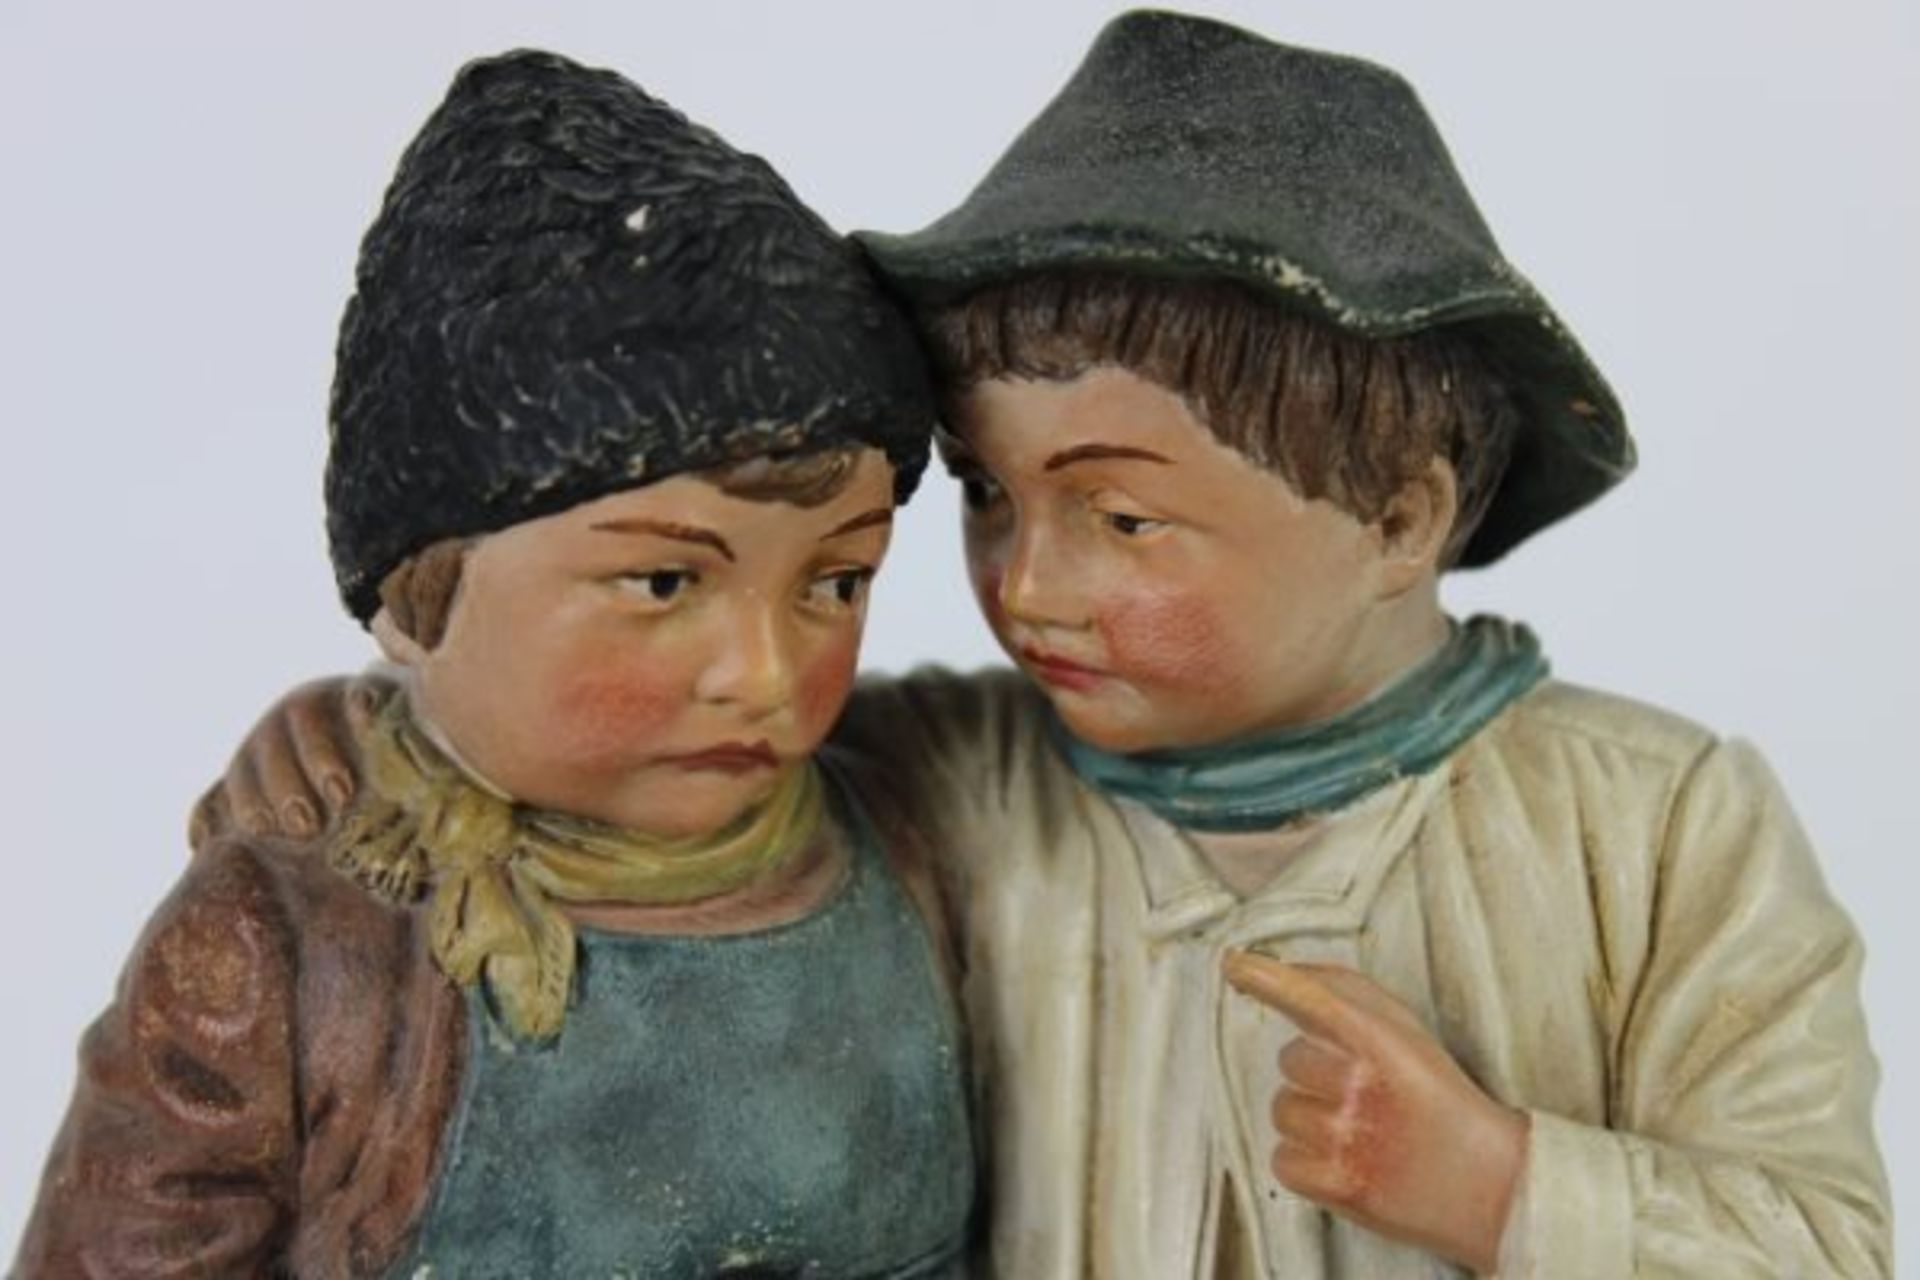 Colorful terracotta sculpture "Two children" - Image 3 of 3